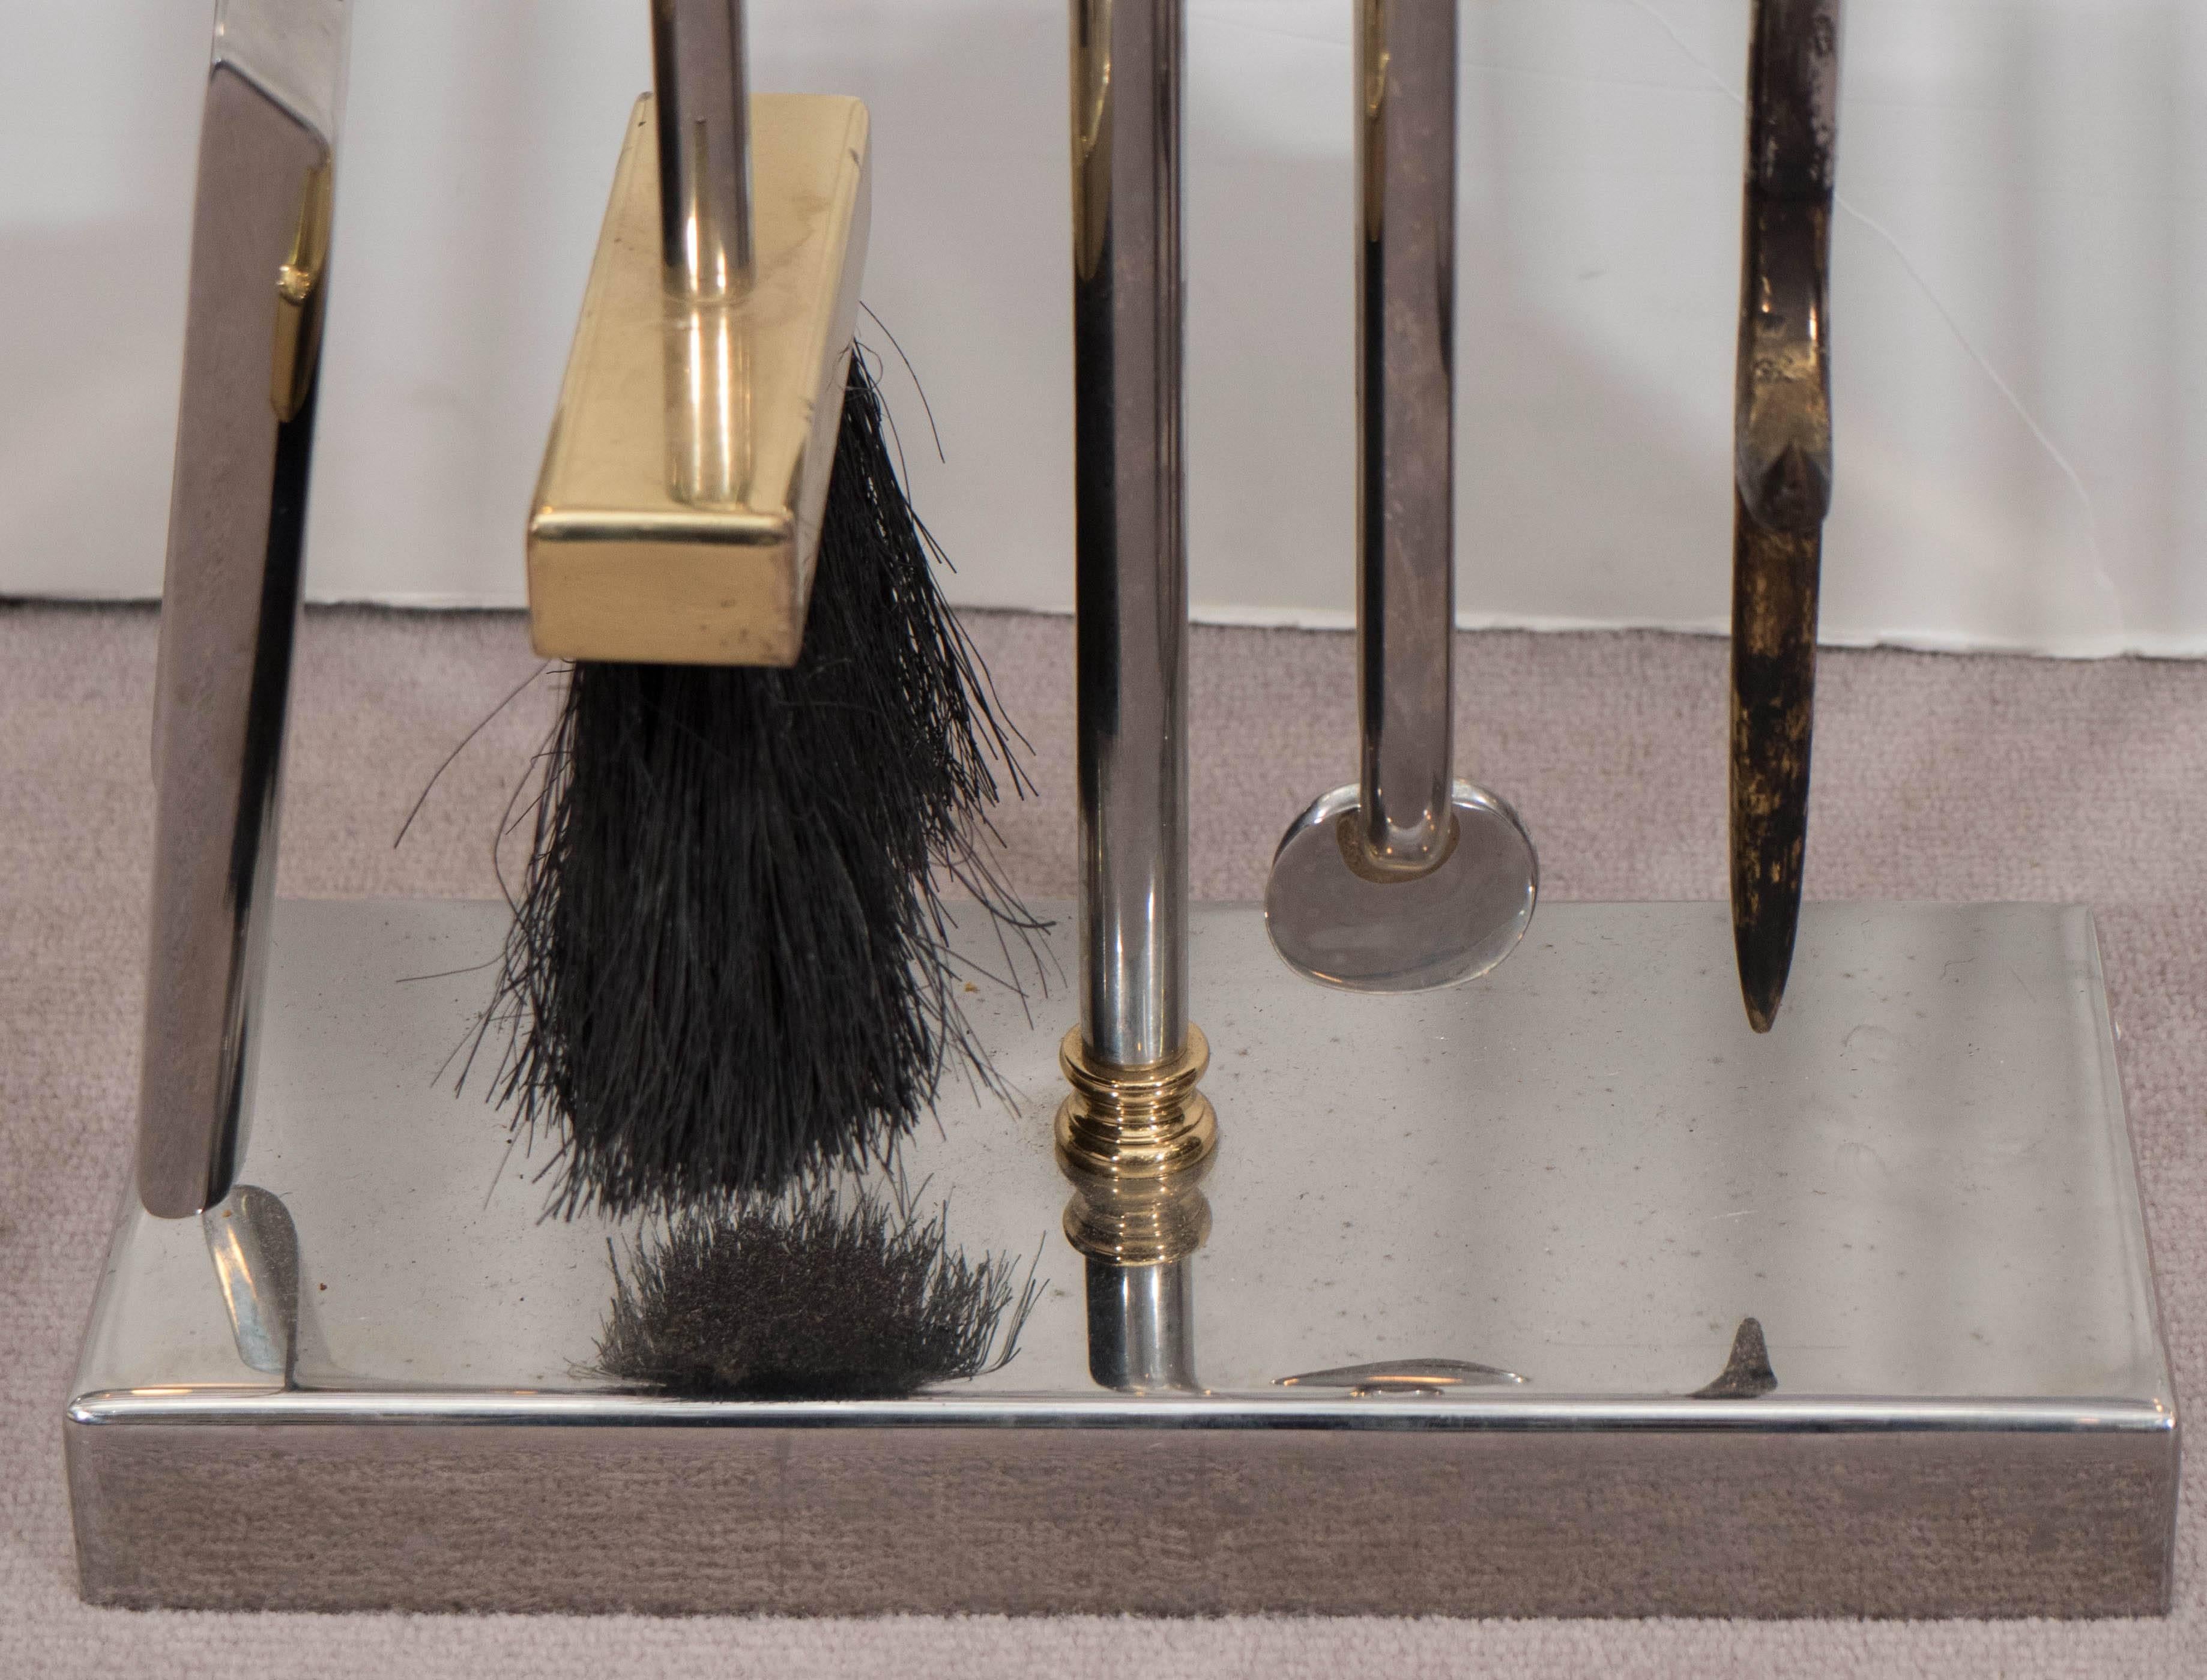 A set of modernistic fireplace tools on stand, designed by Danny Alessandro circa 1980s, including shovel, fire iron, broom and tongs, each in nickel and accented in brass, with ring form handles. Despite some presence of wear to metal finish and